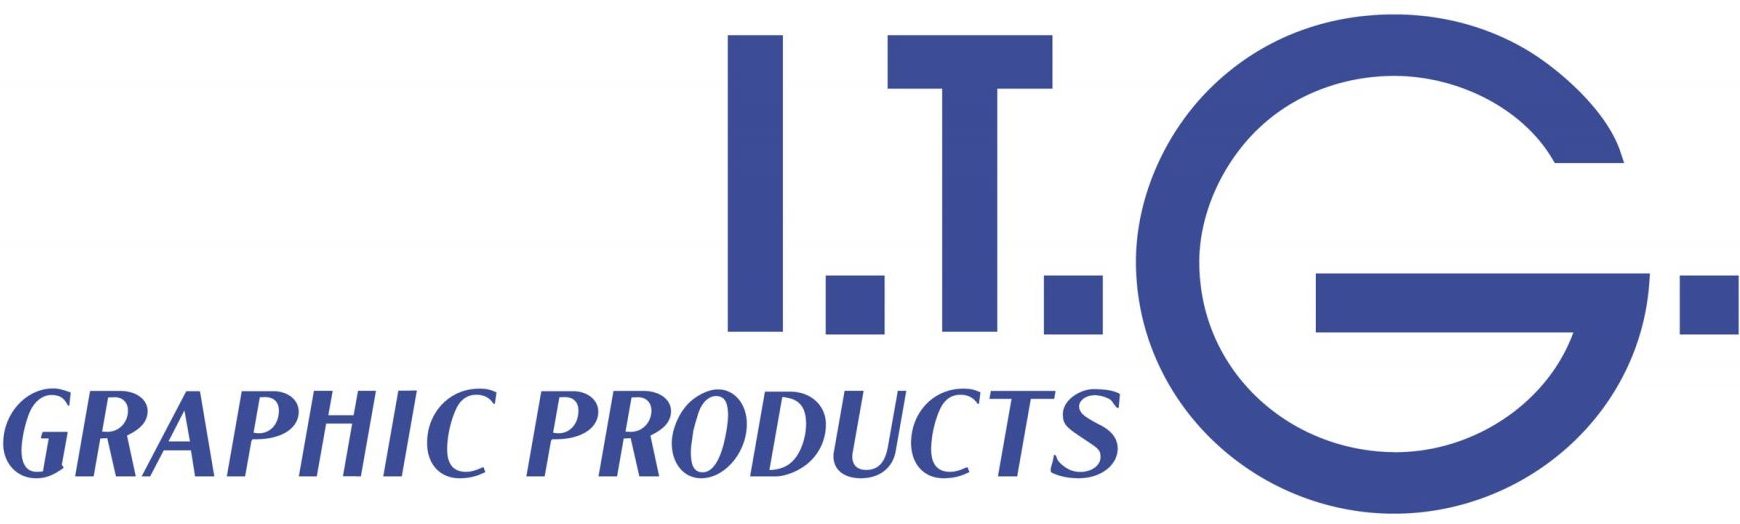 ITG (inline Technologies Group). Graphic products